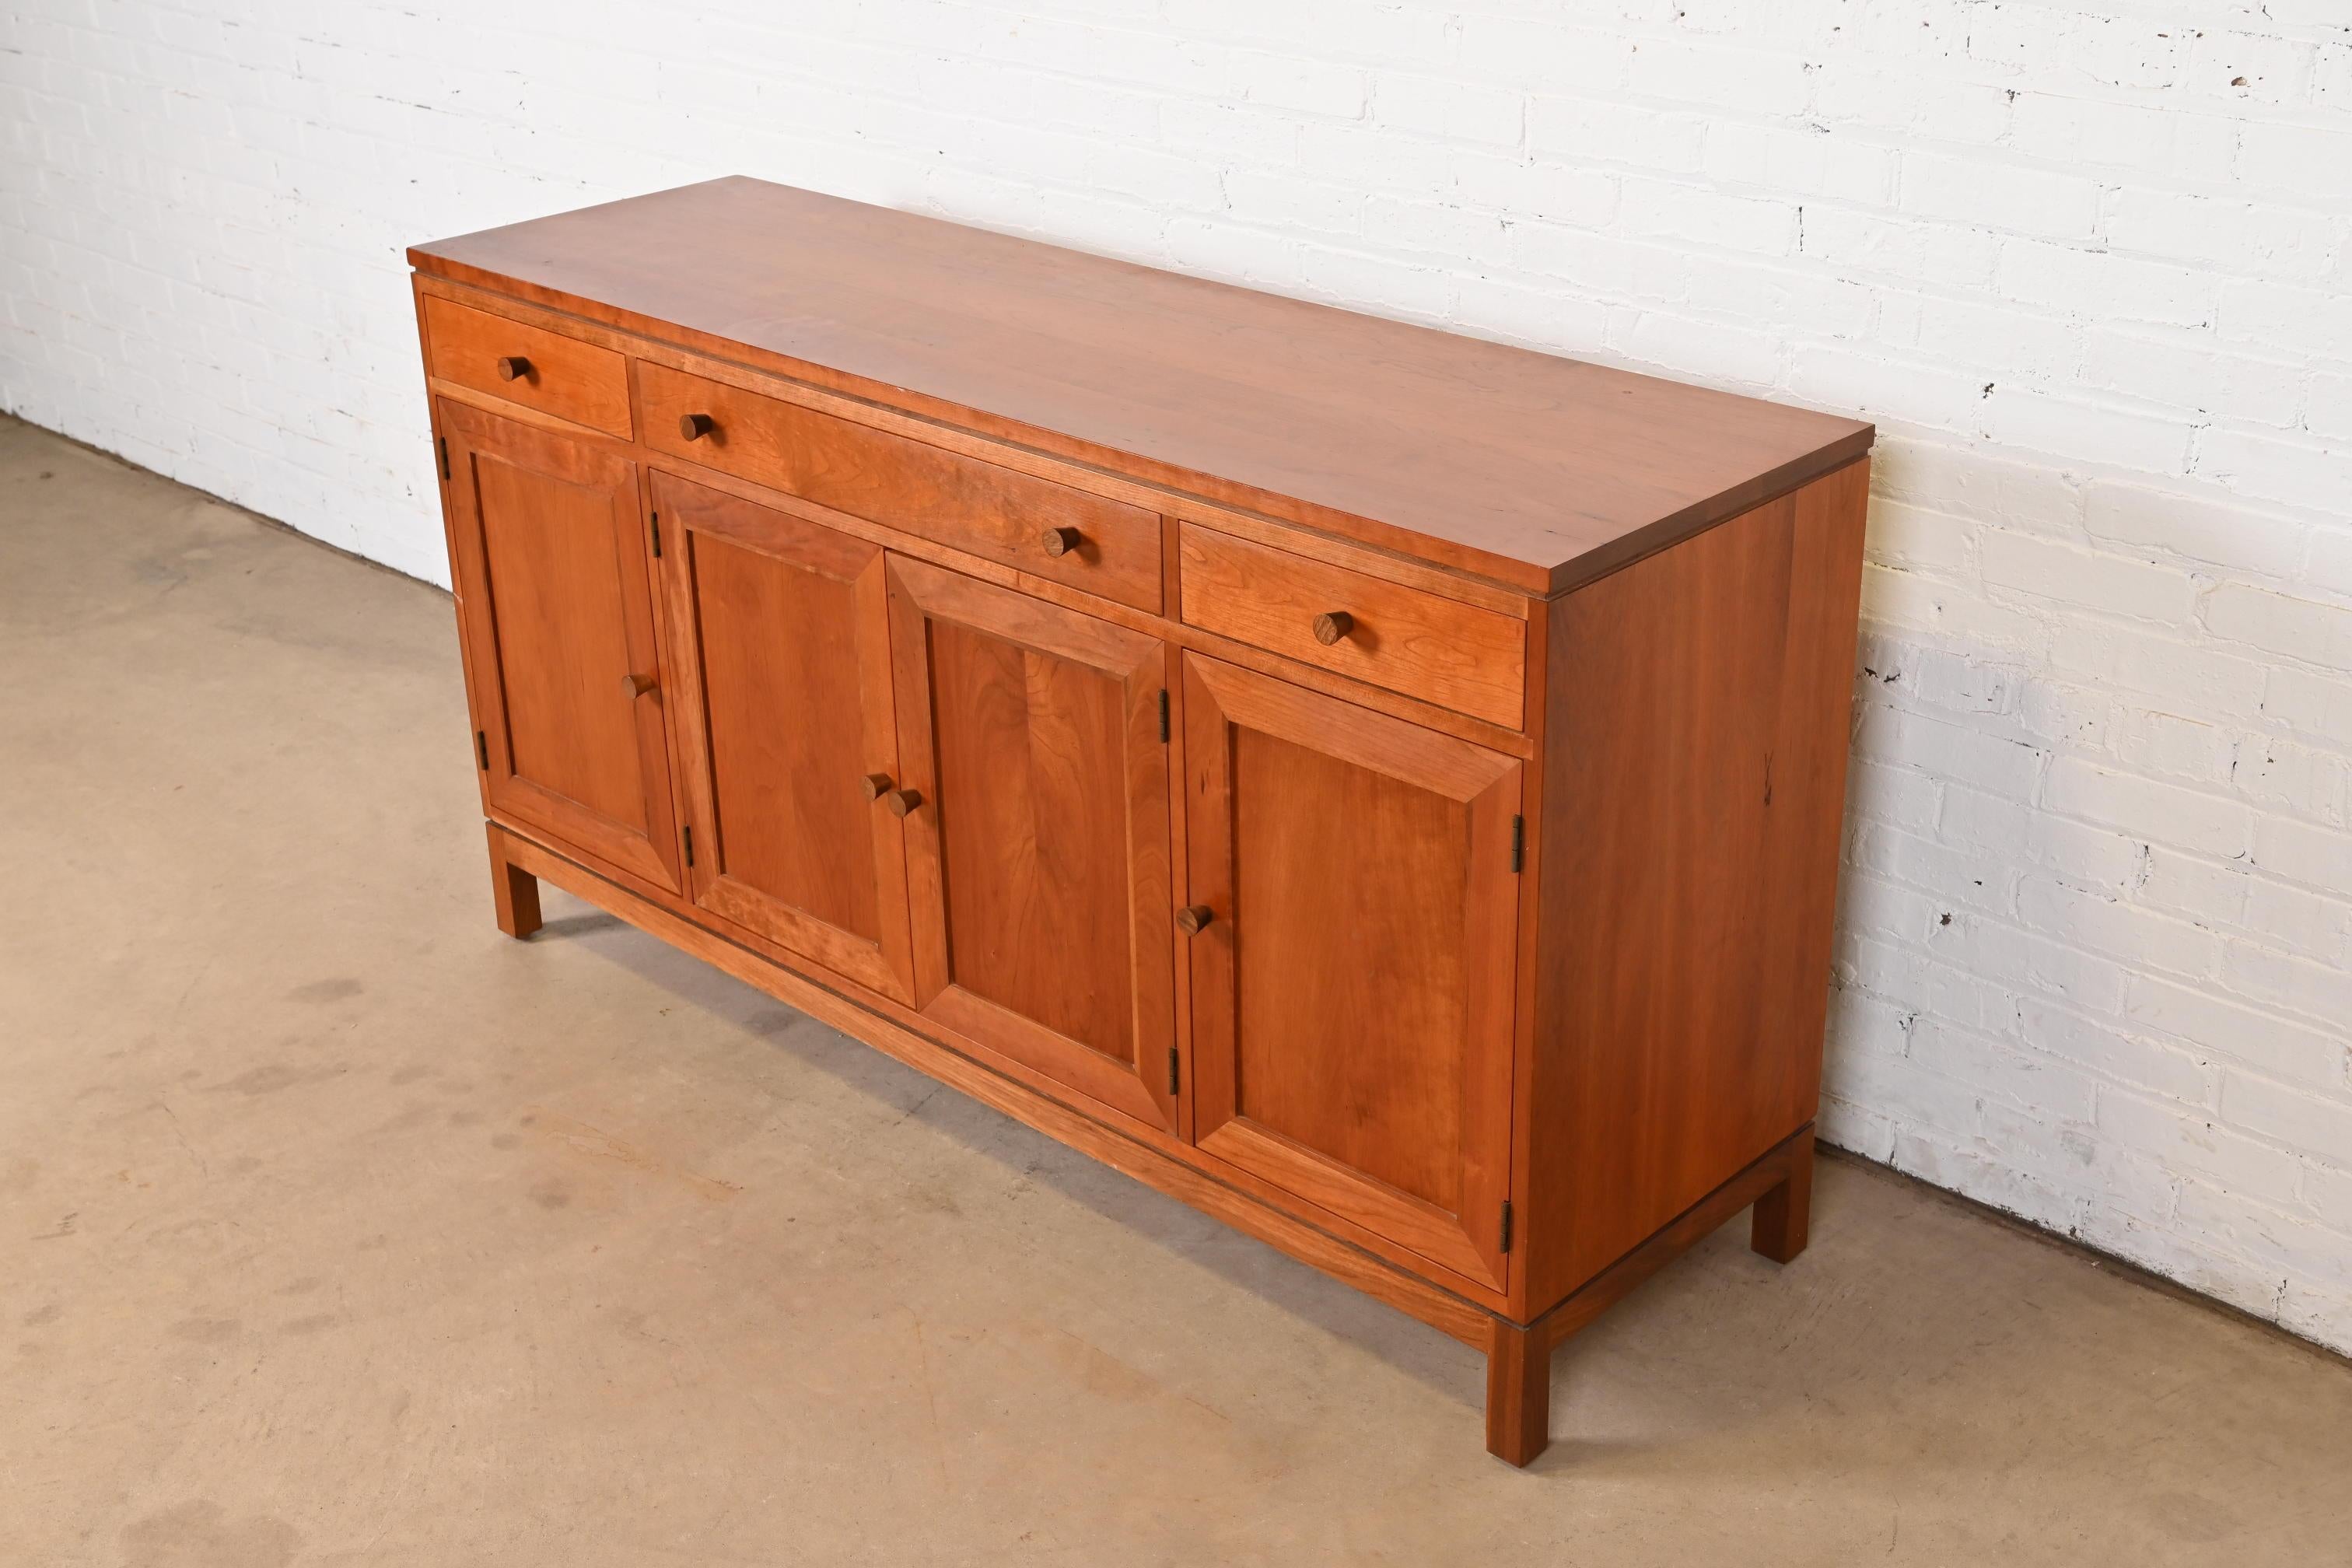 Stickley Arts & Crafts Shaker Cherry Wood Sideboard or Bar Cabinet In Good Condition For Sale In South Bend, IN